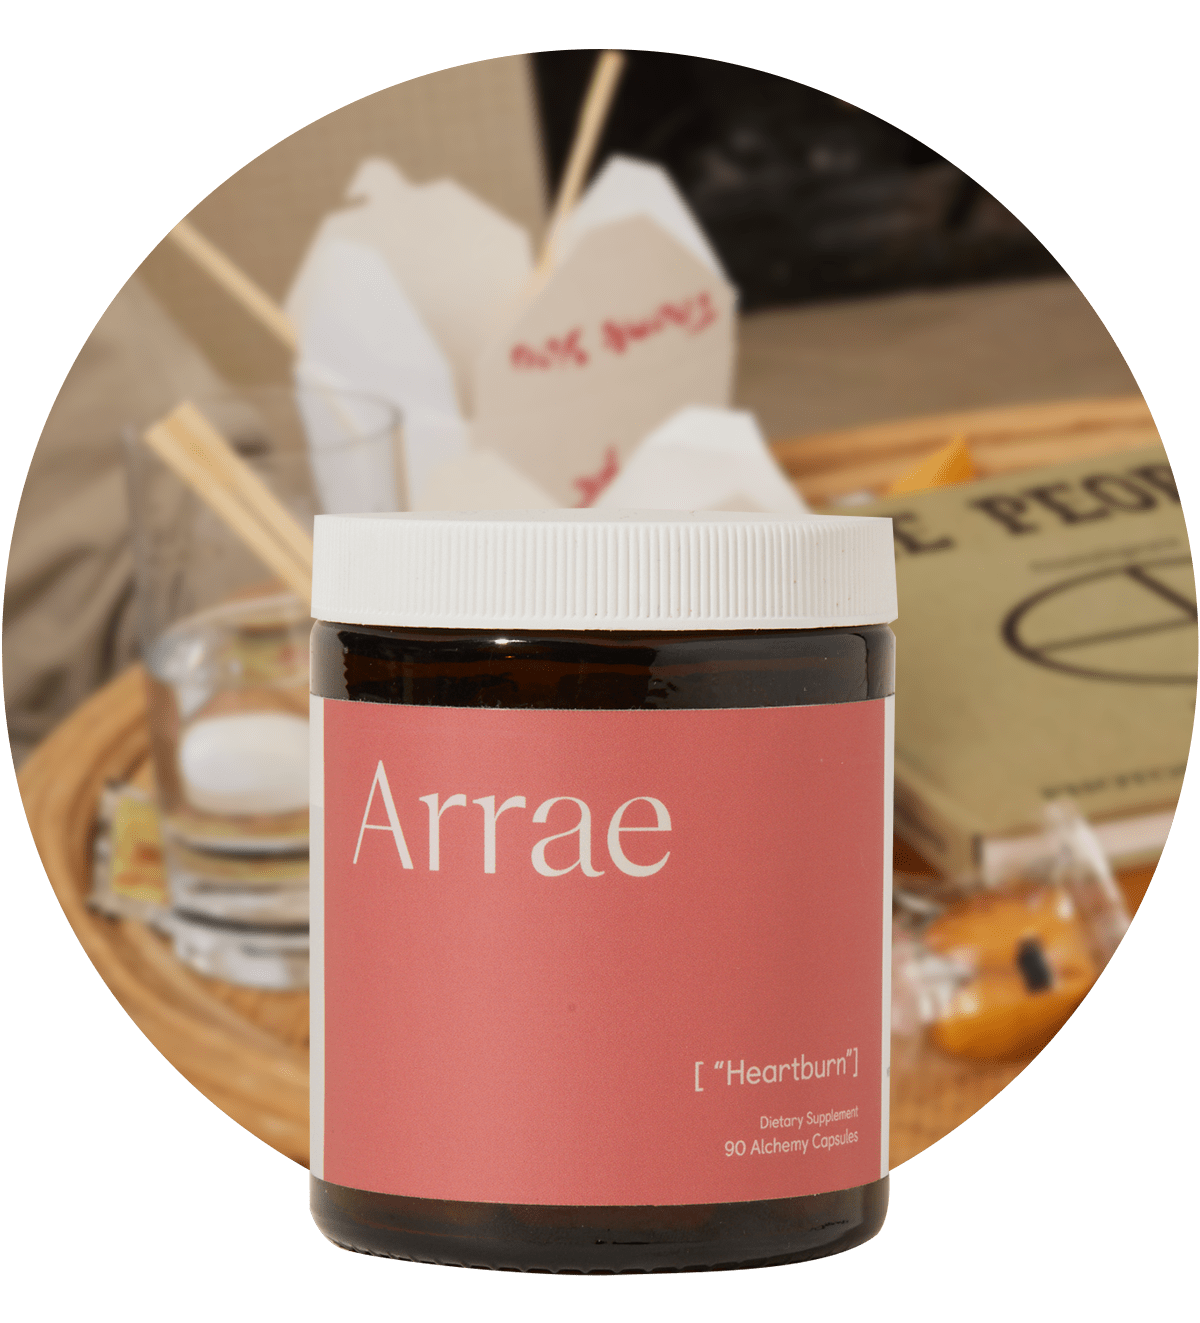 Arrae Heartburn Supplement - A bottle of 90 capsules containing natural ingredients, designed to prevent heartburn and acid reflux in the moment and target the root cause for long-term relief.